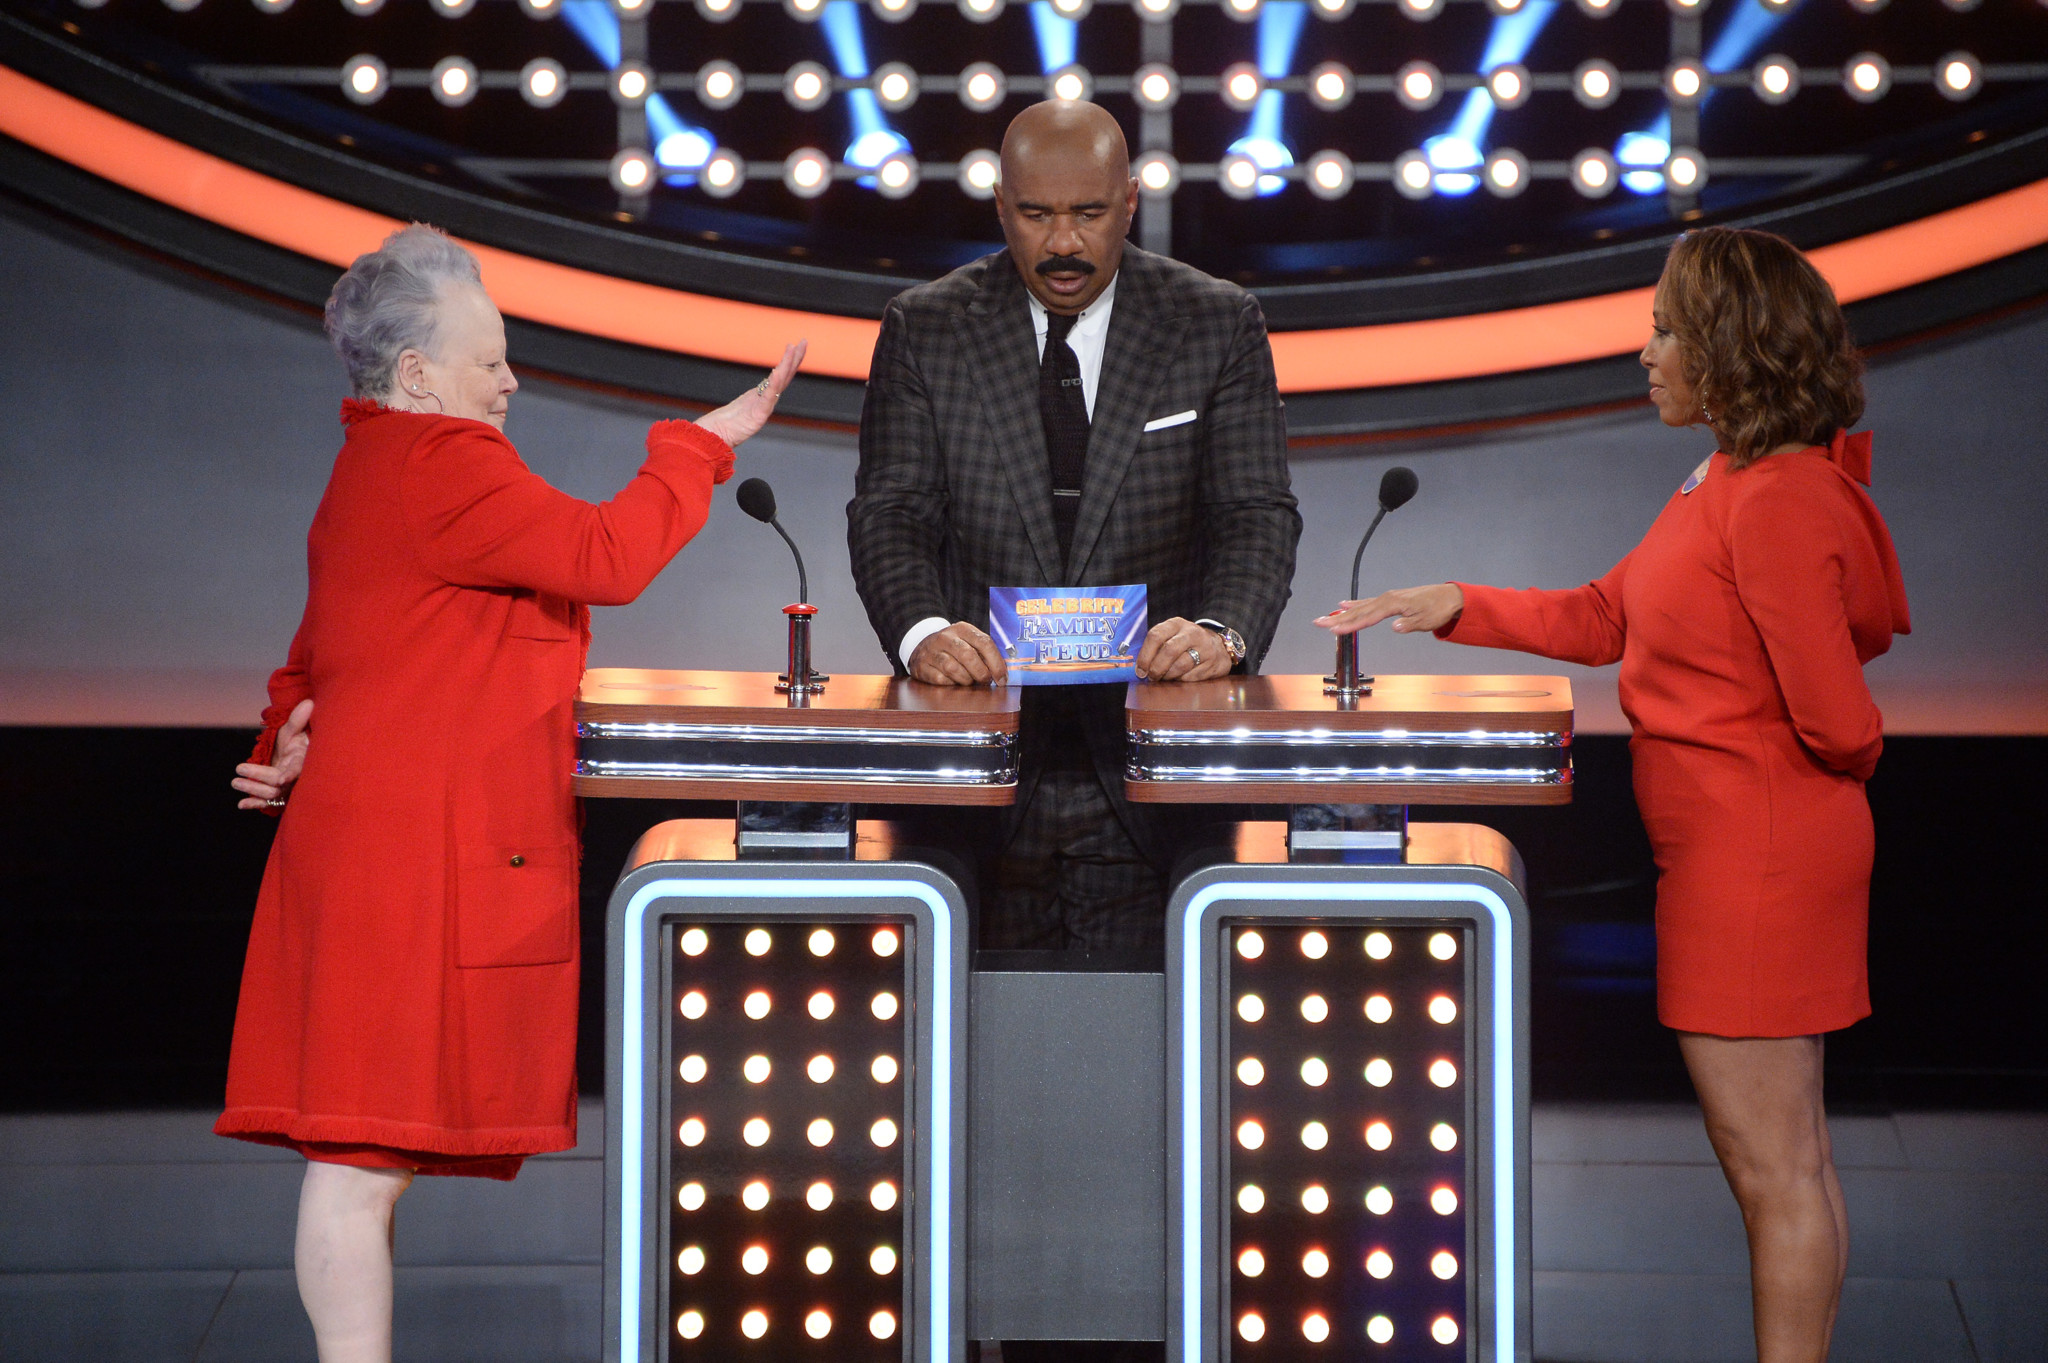 family feud full episode